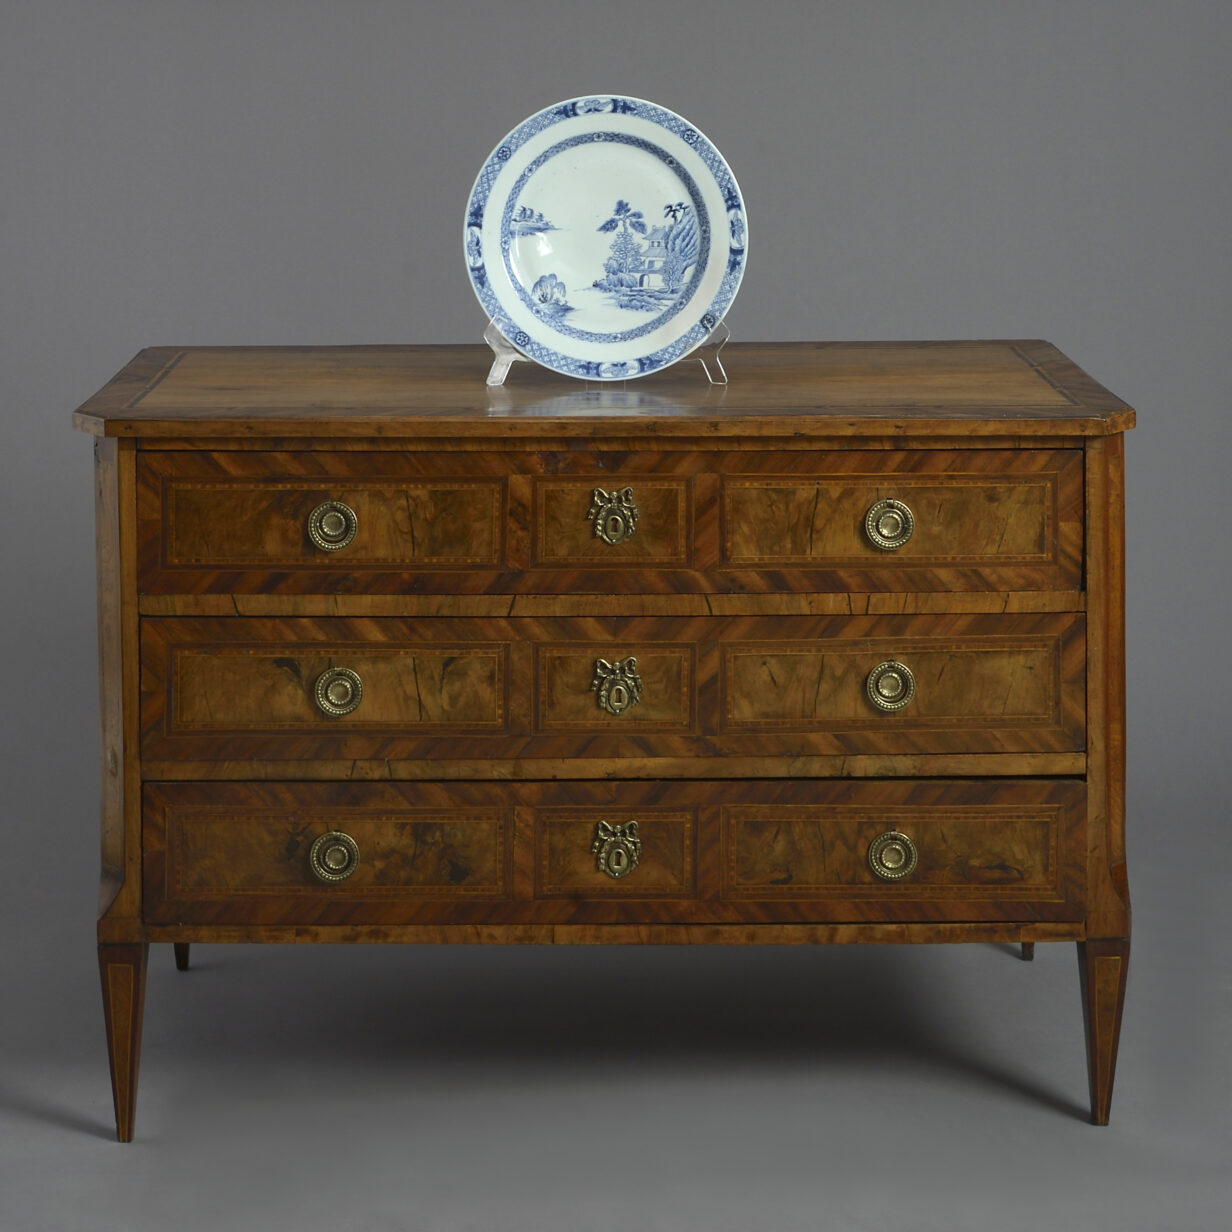 Late 18th century neoclassical inlaid walnut commode